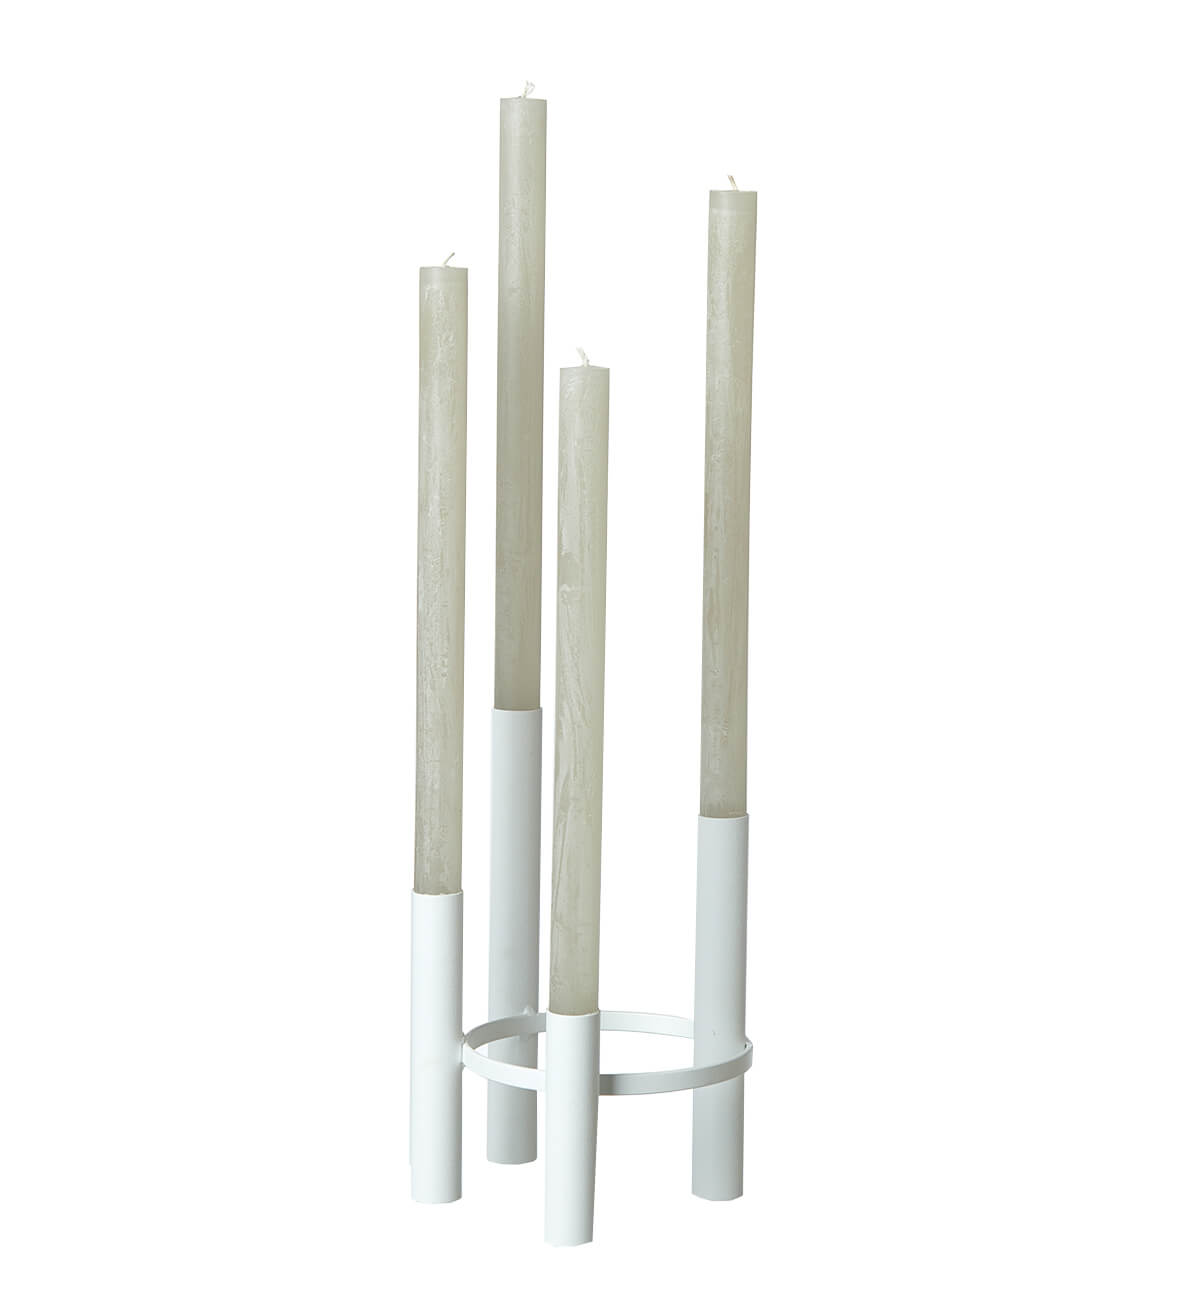 4 Arm Candle Holder - White